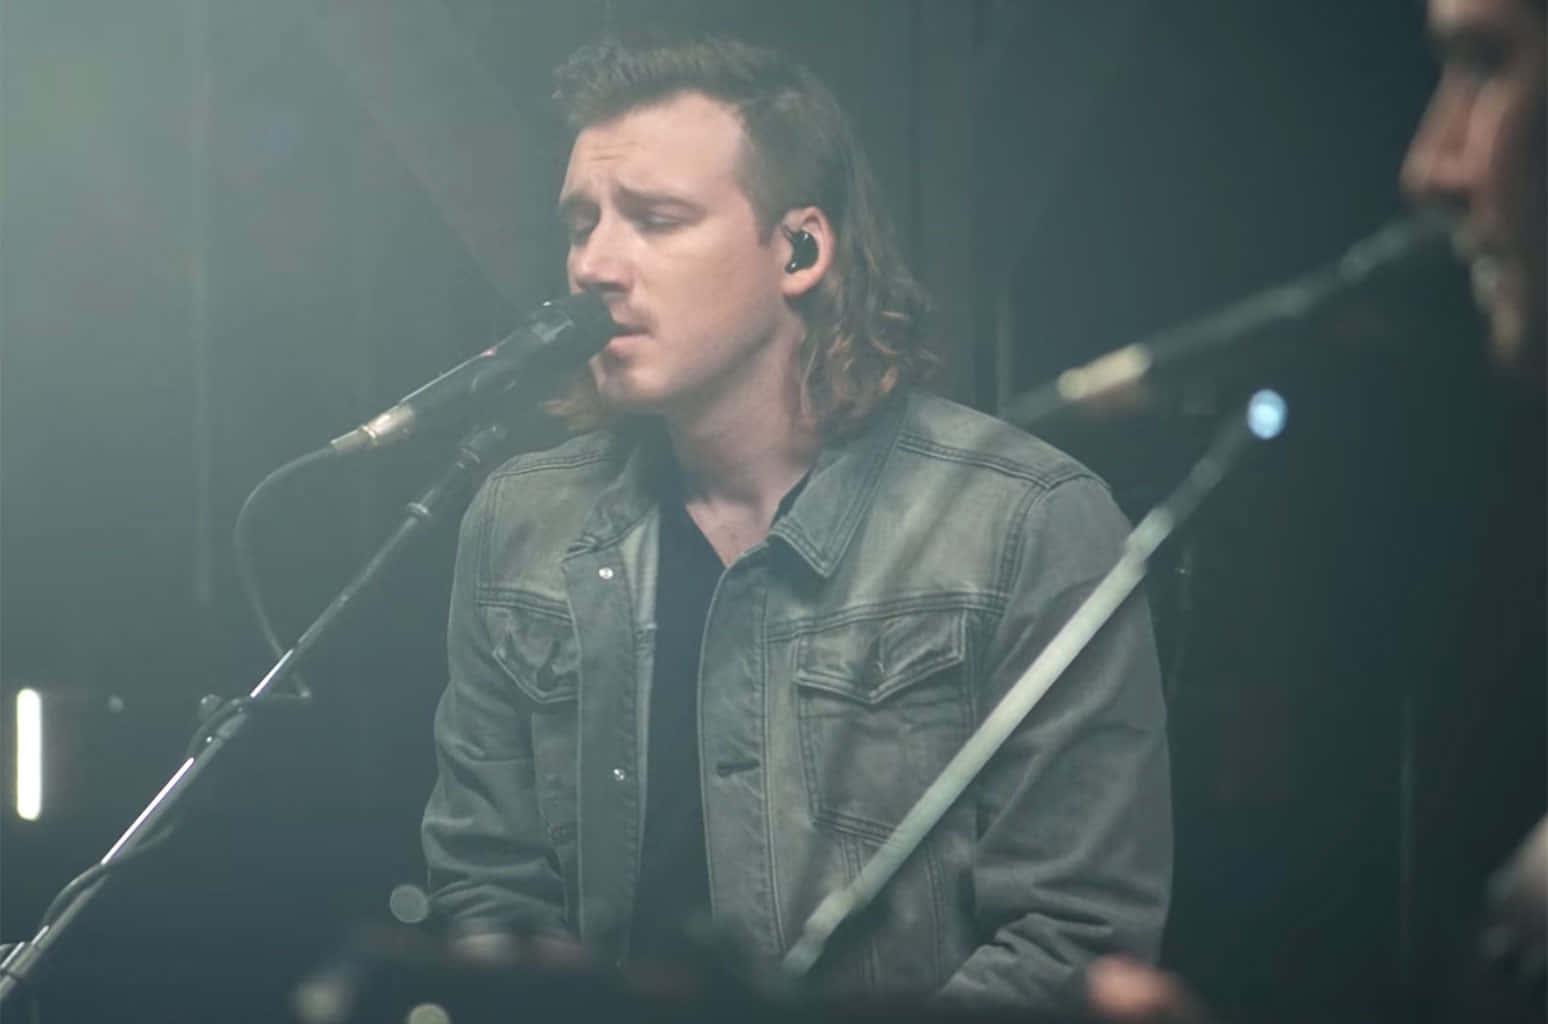 Up-and-coming country artist Morgan Wallen